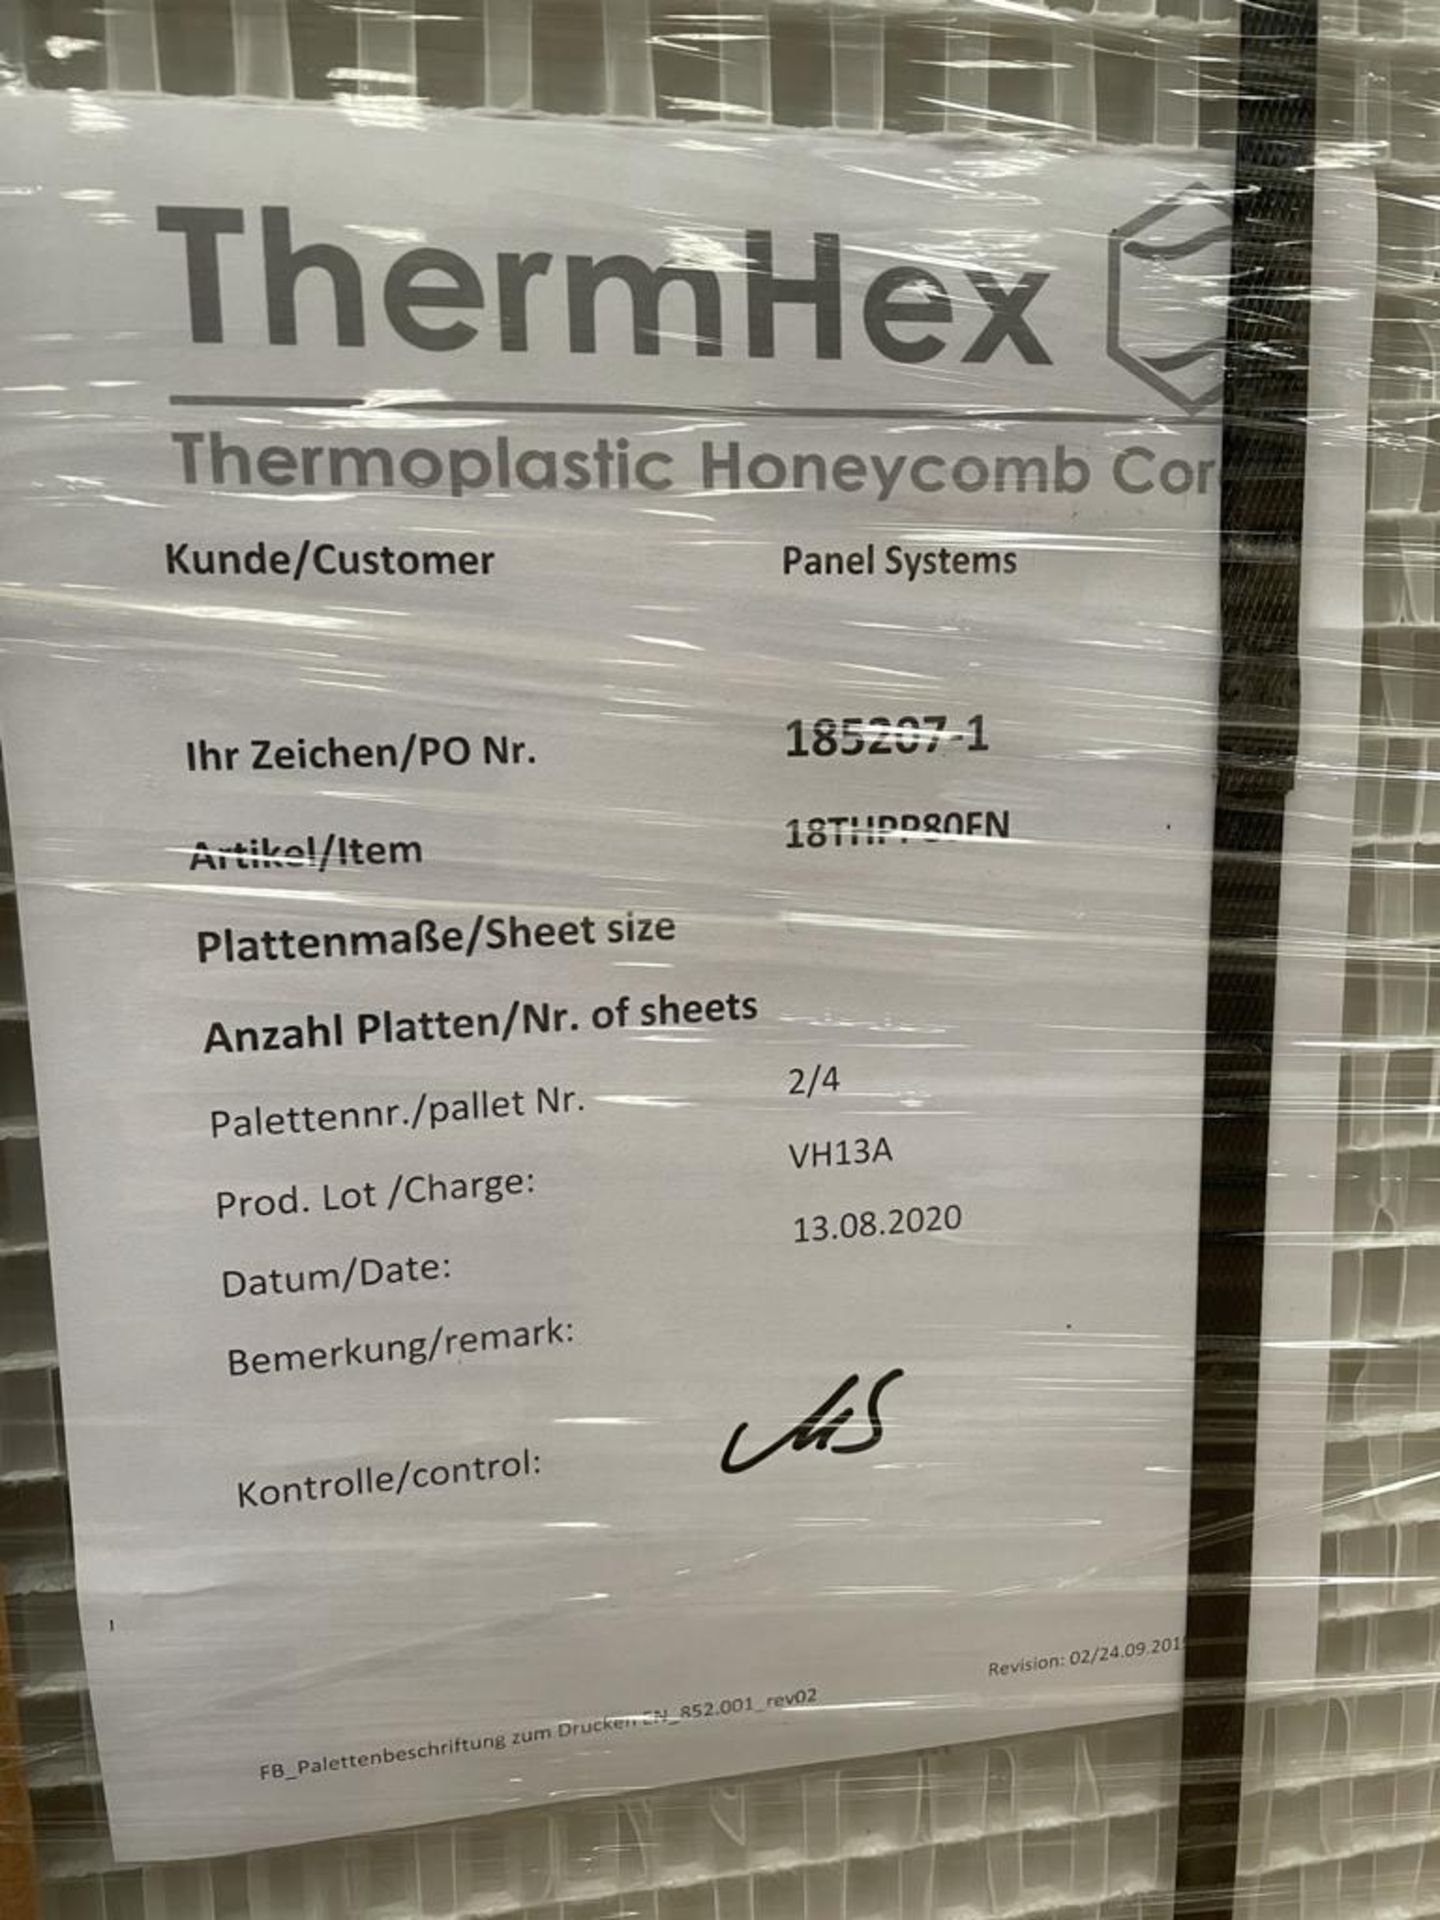 25 x ThermHex Thermoplastic Honeycomb Core Panels - Size 2630 x 1210 x 18mm - New Stock - - Image 2 of 8